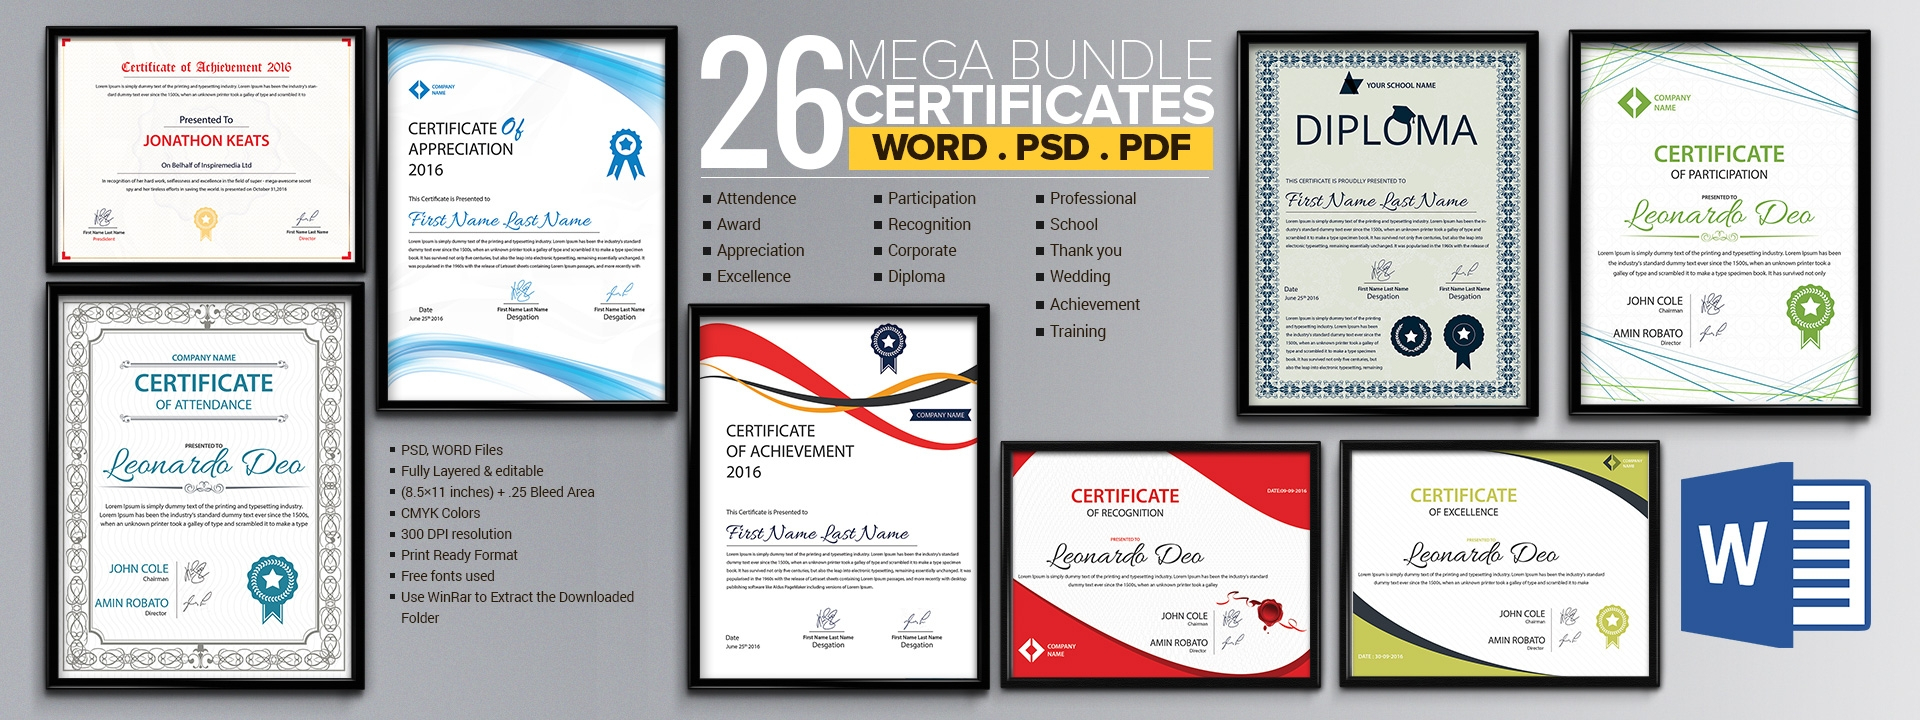 Word Certificate Template – 53+ Free Download Samples In Award Certificate Templates Word 2007